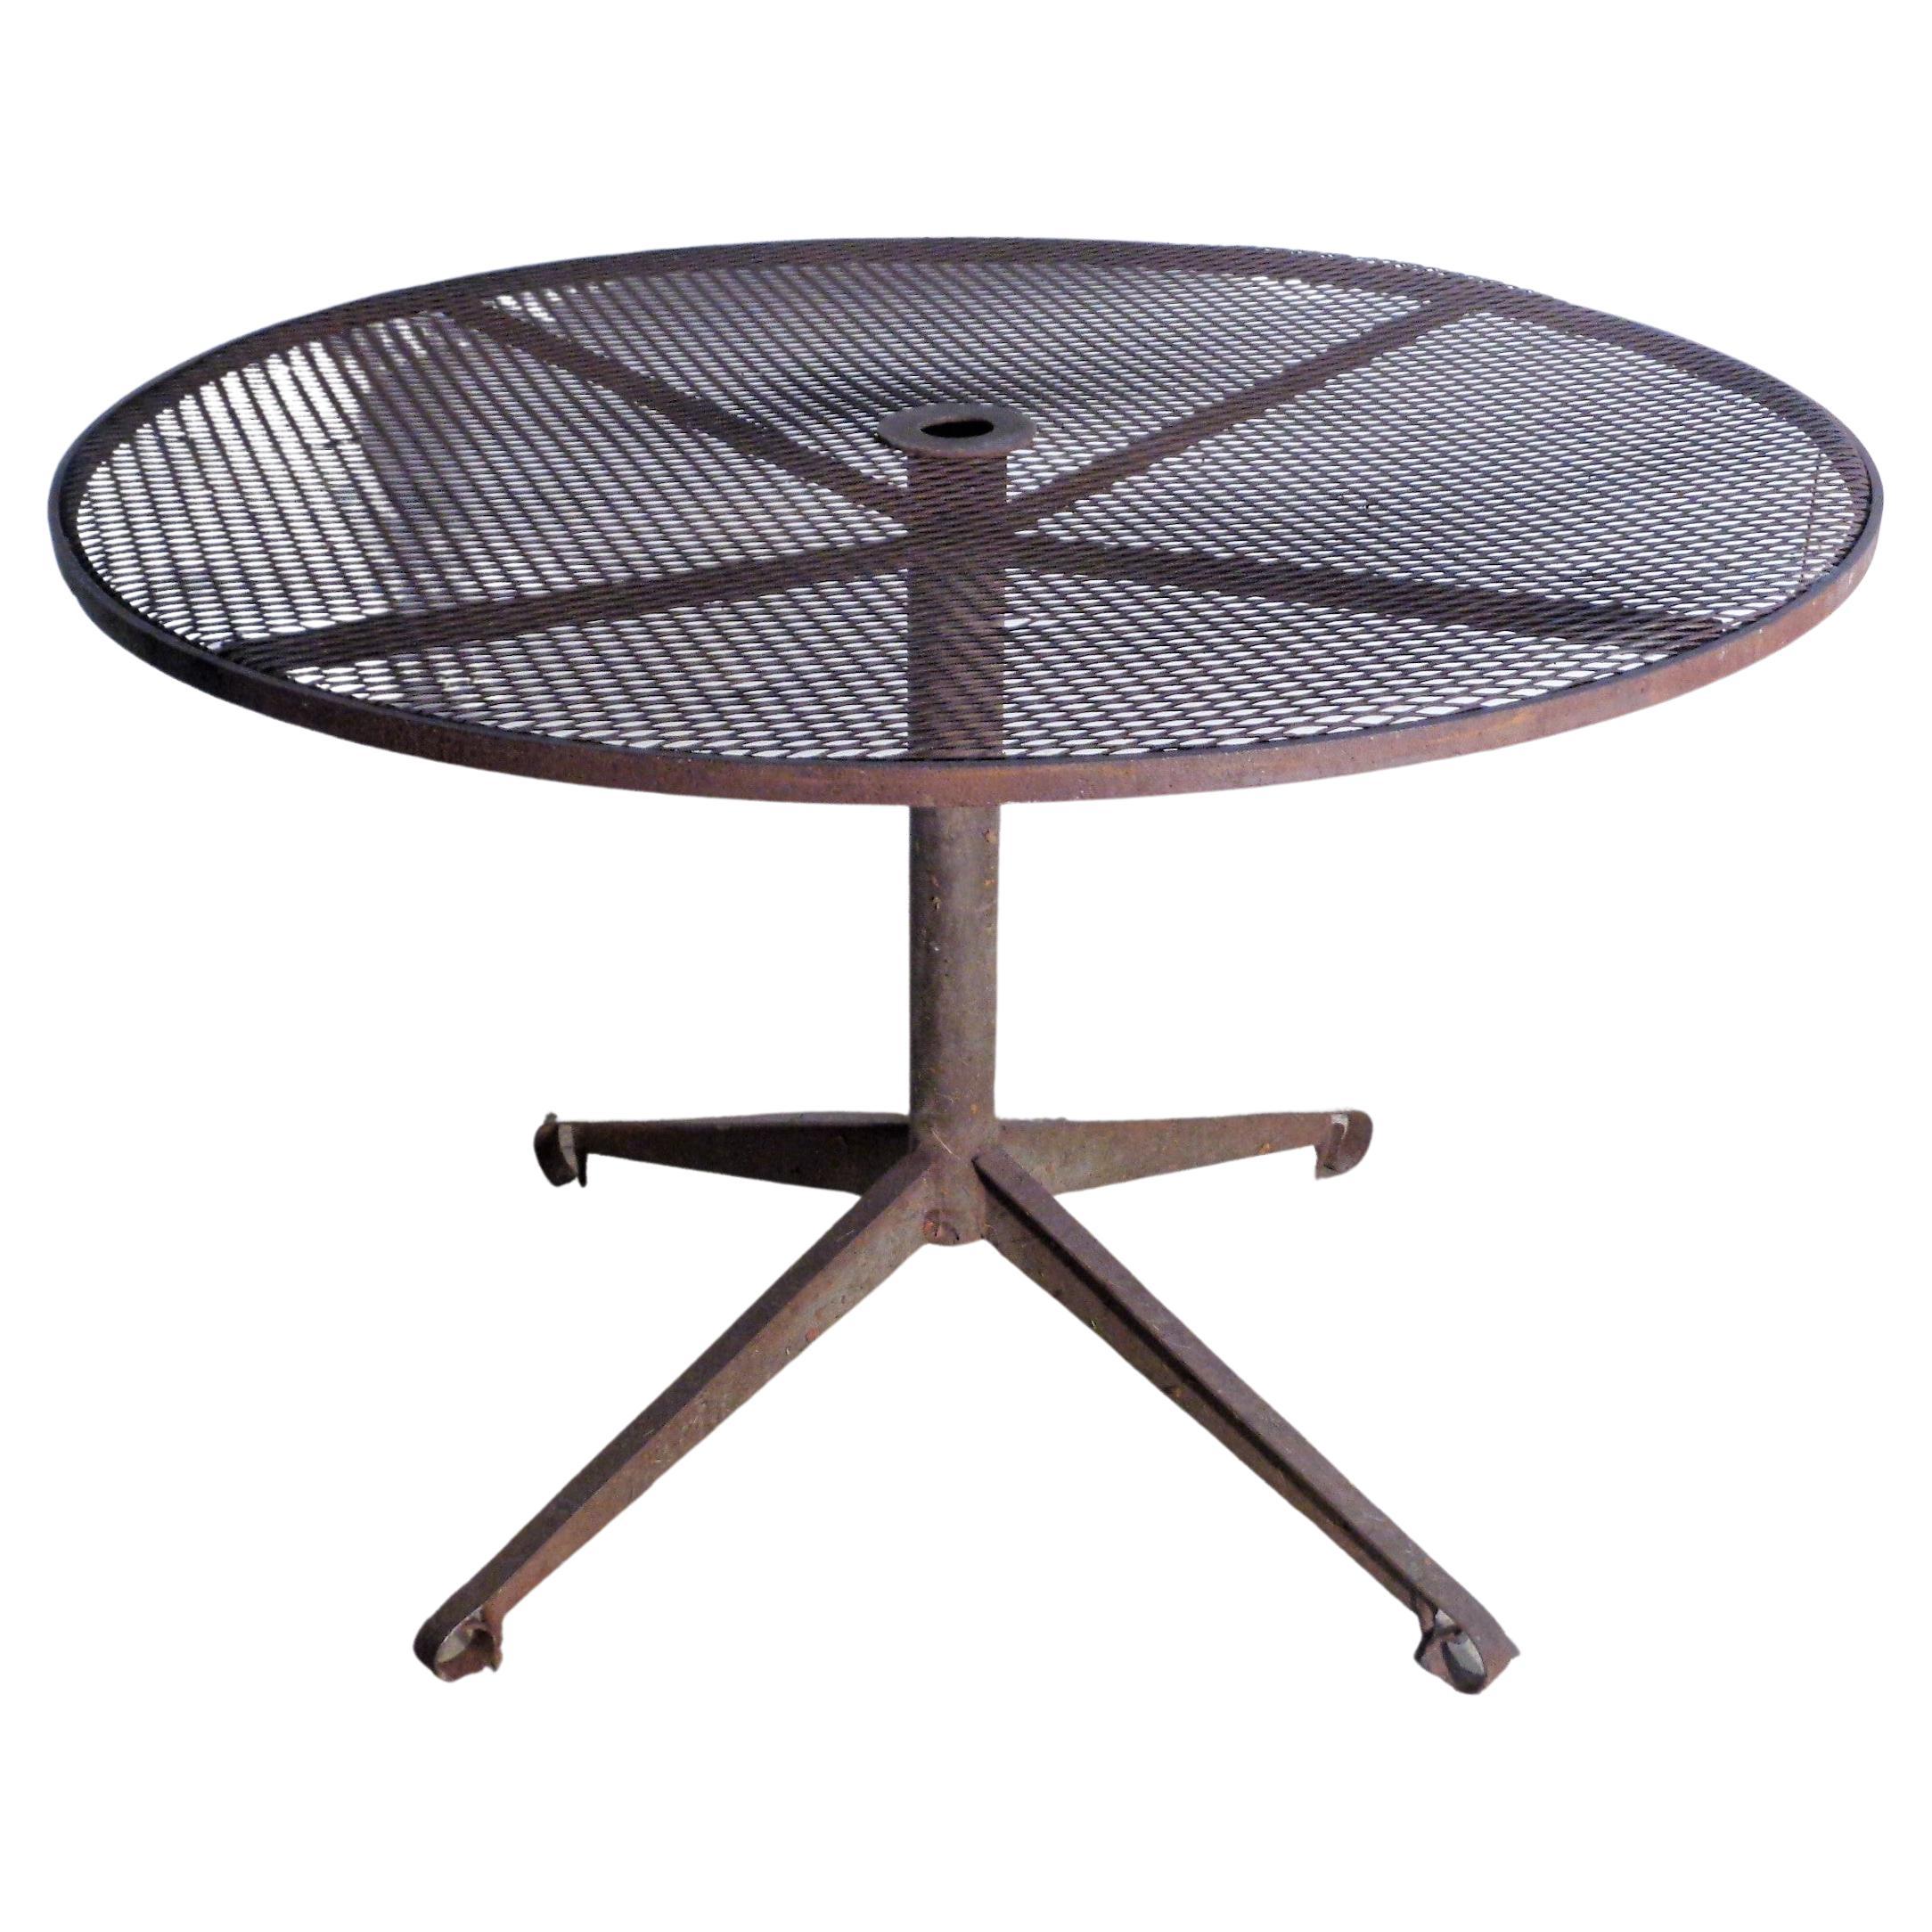  Modernist wrought iron dining table for garden patio. Round steel mesh top w/ hole for umbrella / pedestal base ending in four beautifully angled legs. Attributed to Russell Woodard Sculptura. Circa 1950's. Measures 41